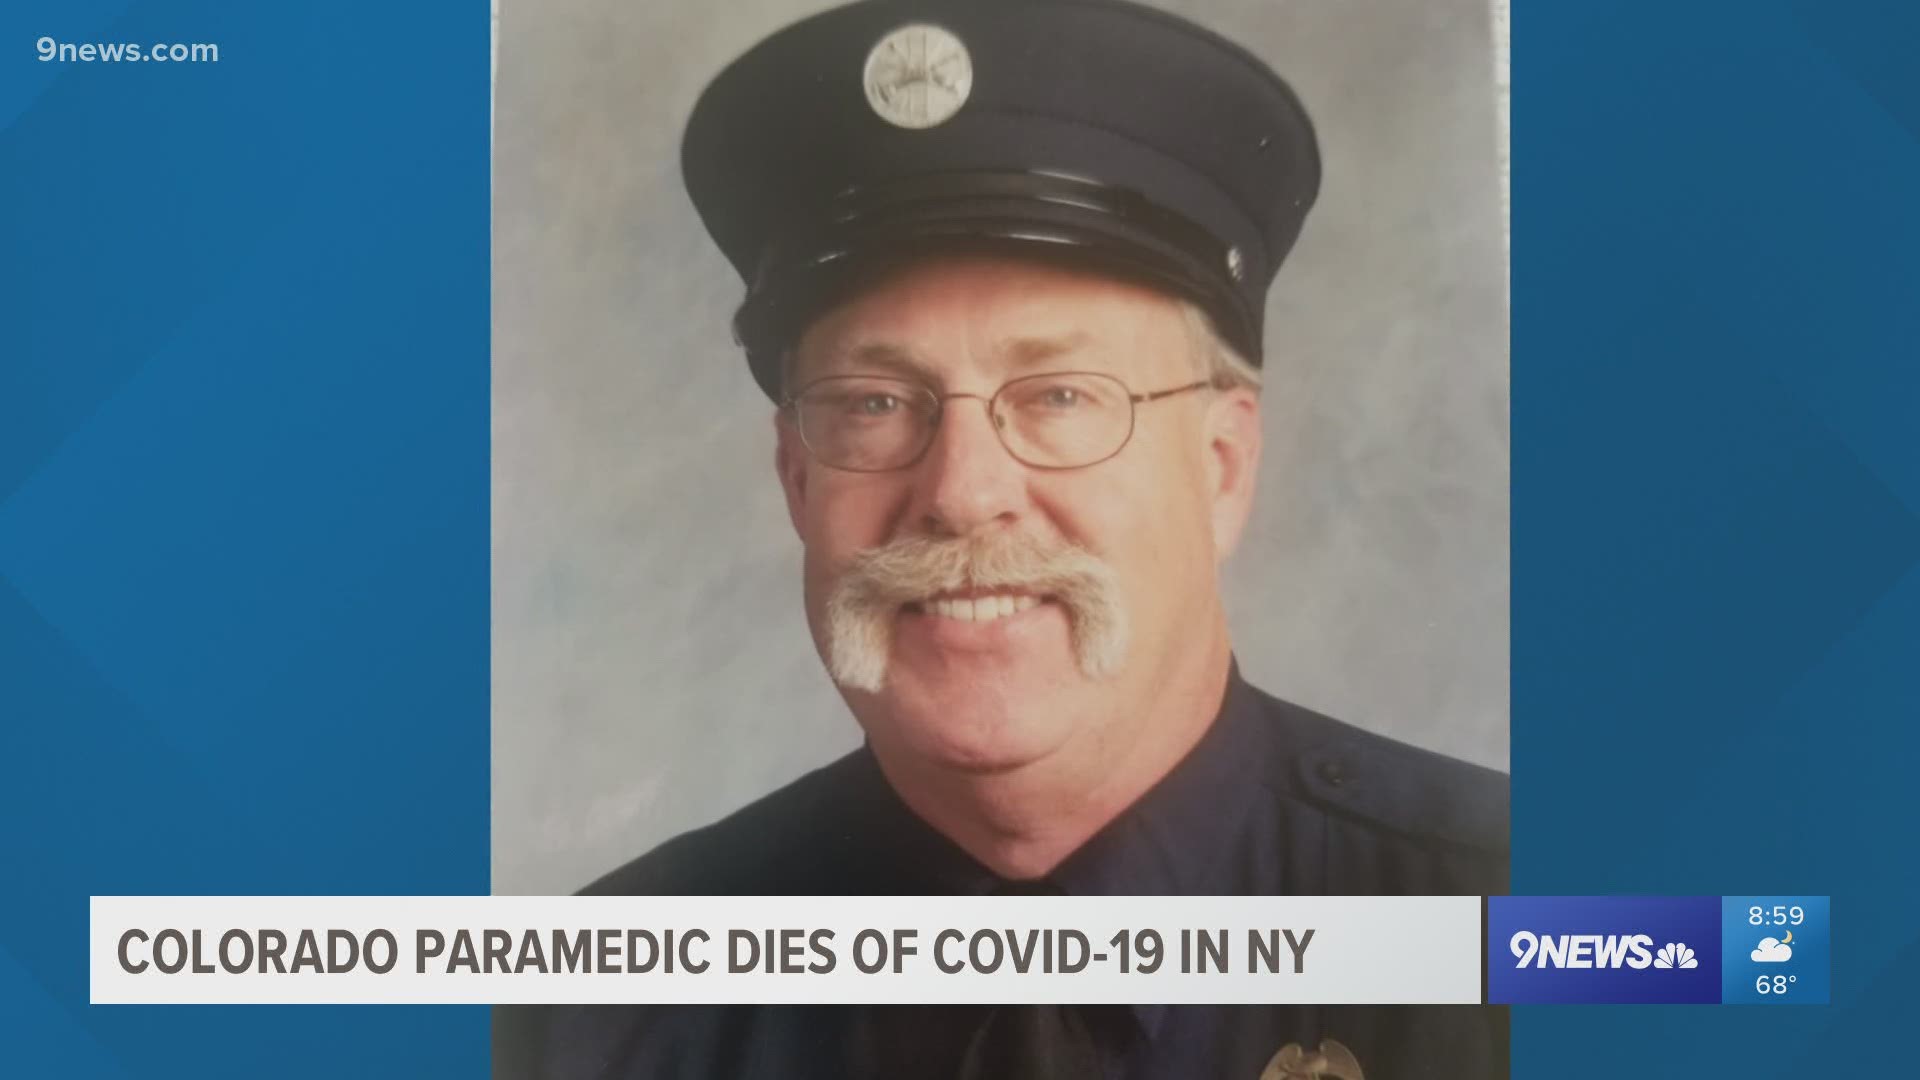 Paul Cary was a former Aurora paramedic and firefighter who volunteered to go to the epicenter of the coronavirus pandemic.